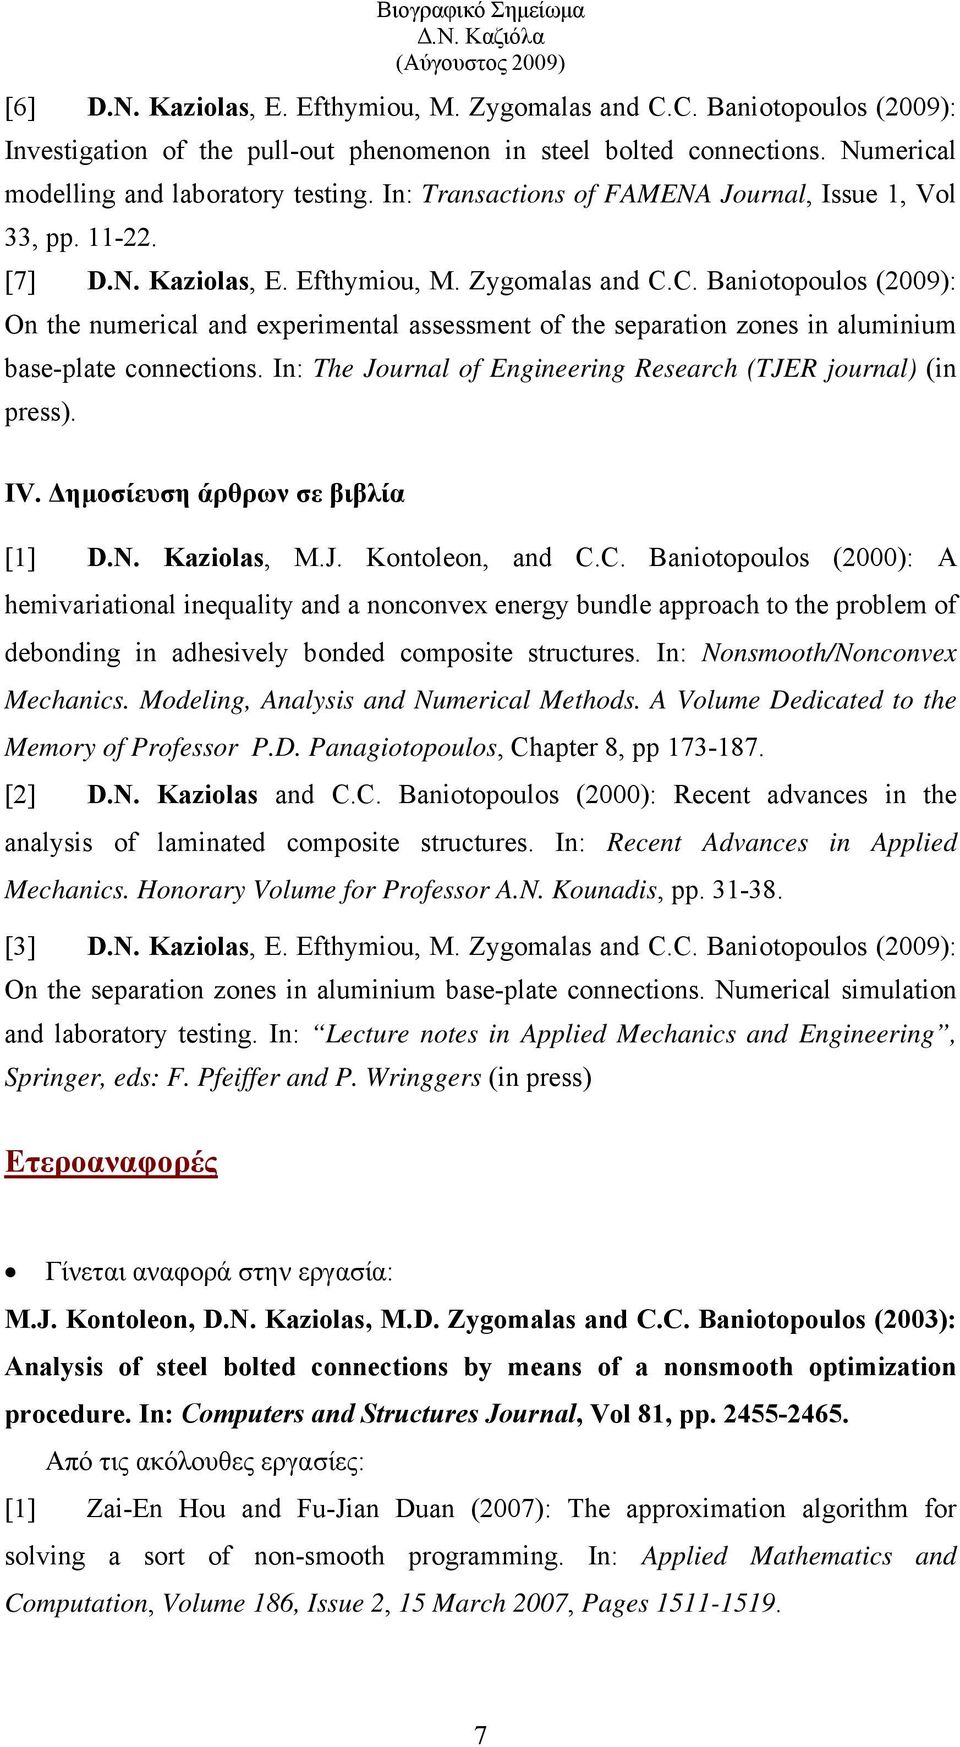 C. Baniotopoulos (2009): On the numerical and experimental assessment of the separation zones in aluminium base-plate connections. In: The Journal of Engineering Research (TJER journal) (in press).